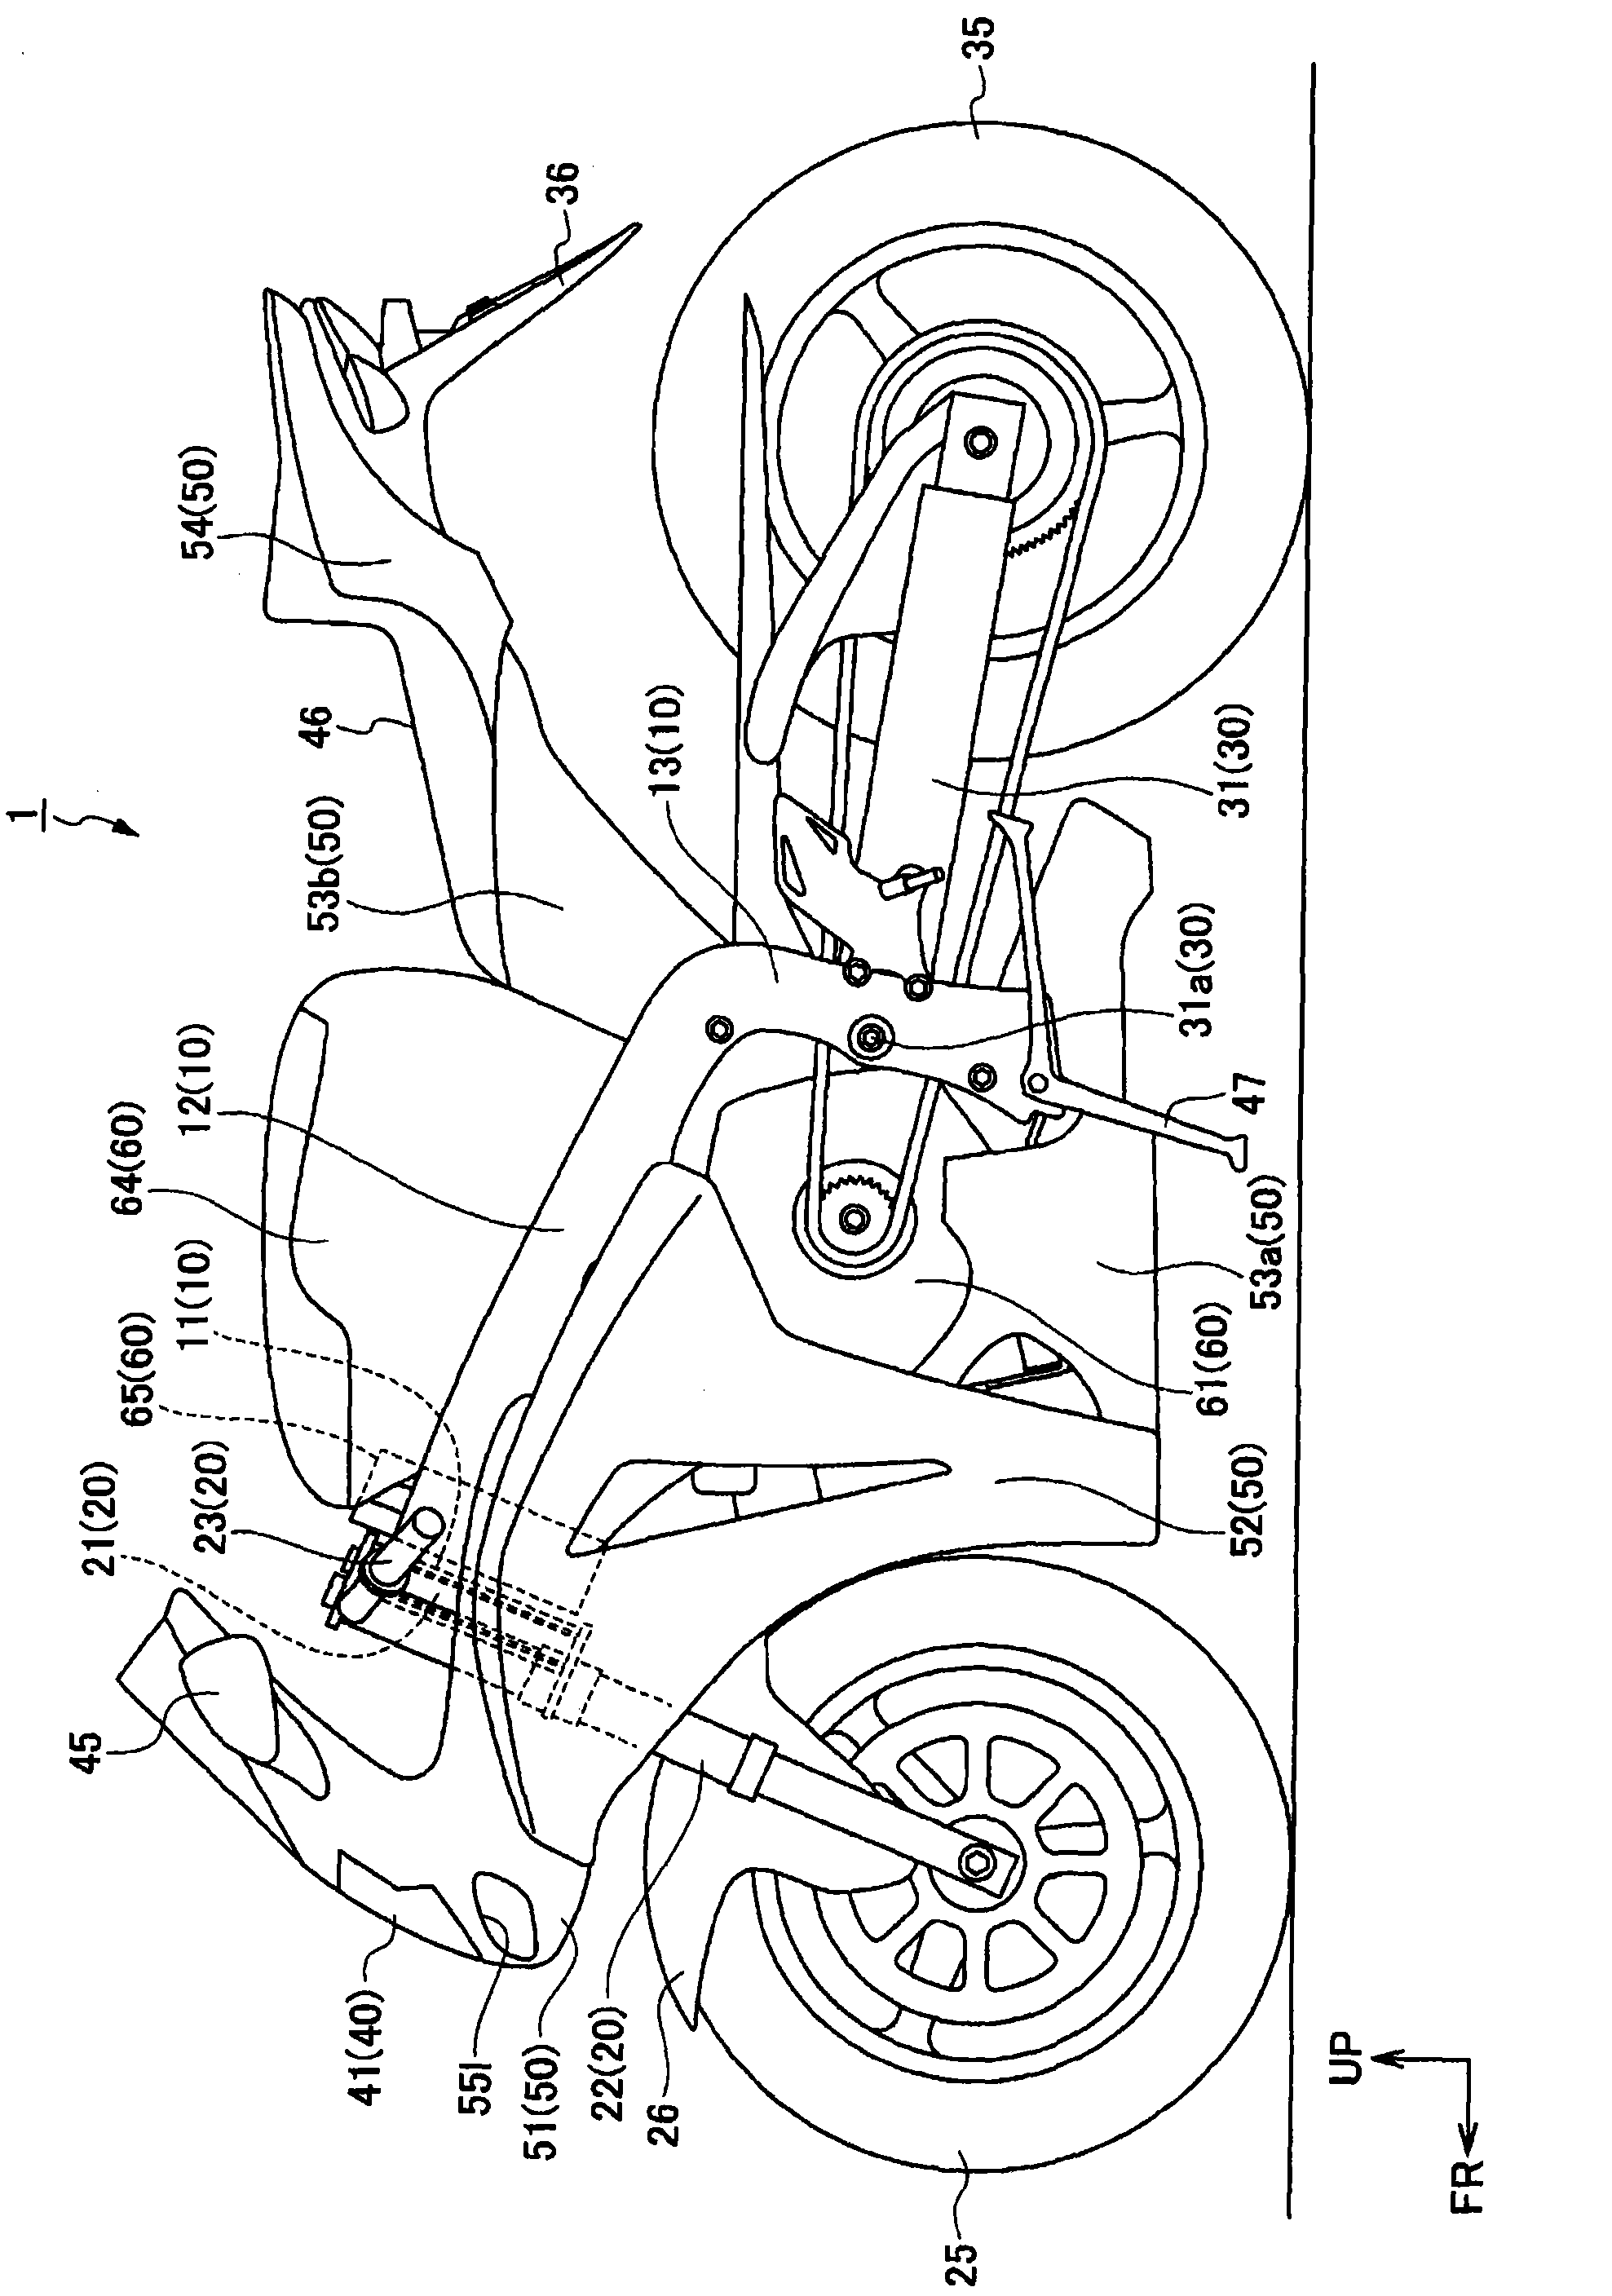 Power connection part receiving structure for straddle type vehicle